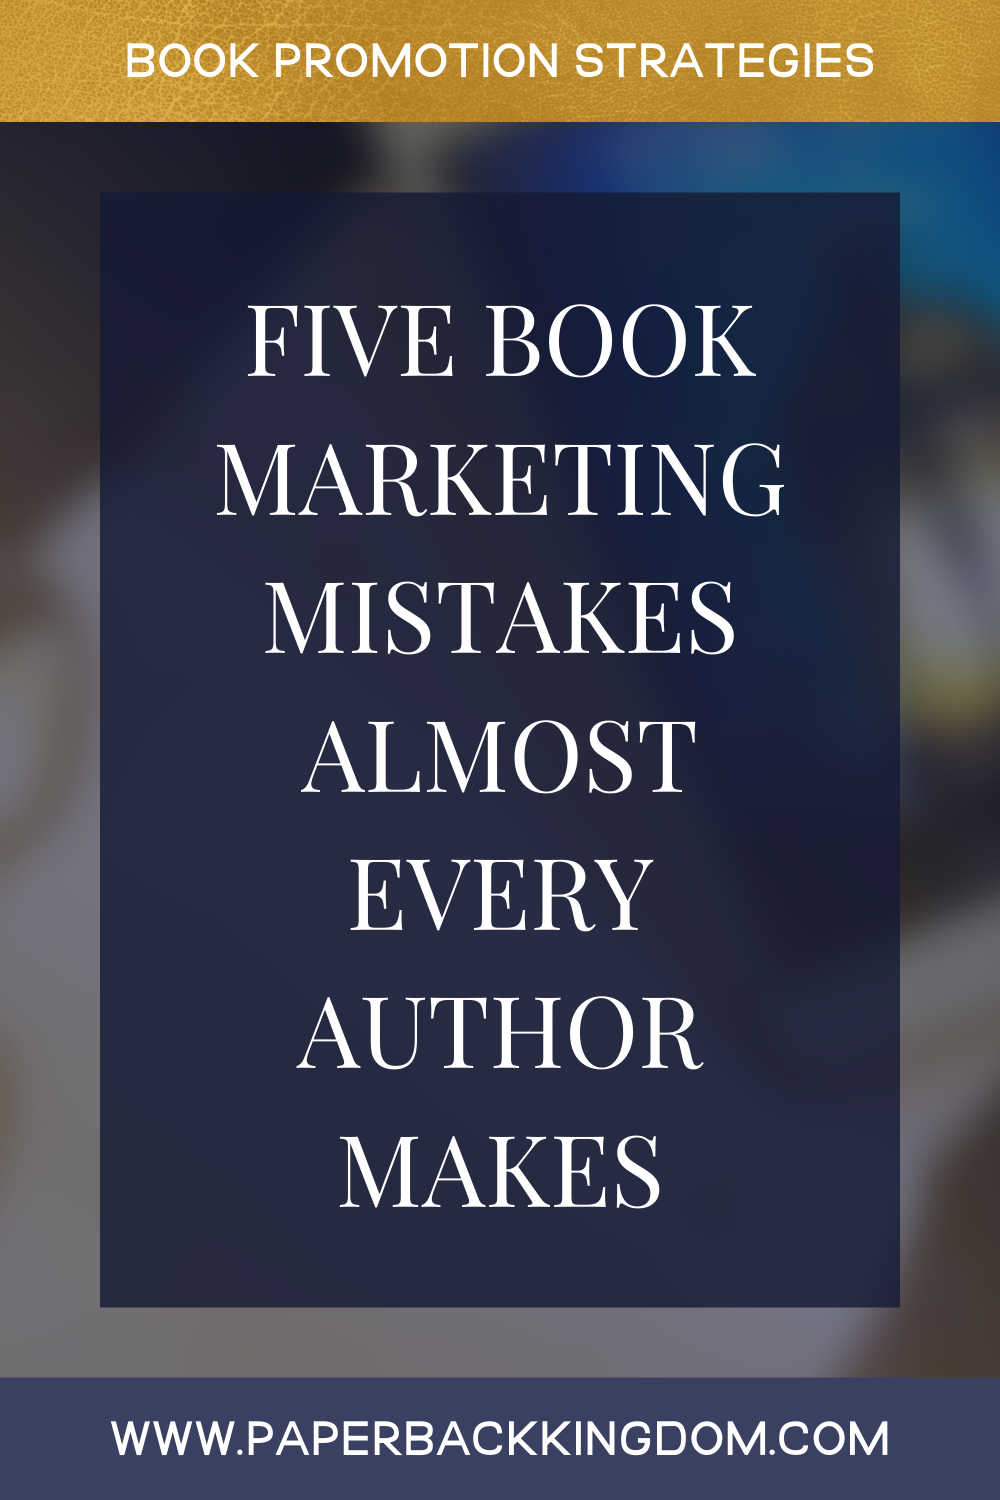 Five Book Marketing Mistakes Almost Every Author Makes - I know that you got into authorship because you loved to write, but not necessarily because you signed up to learn marketing. Unfortunately, authorship is a business, which means that like it or not, marketing is now a part of your job. But I want to ease the pressure here by emphasising that it's normal to make mistakes in the beginning. After all, it's a completely new skillset that you're trying to master. That's why I want to set you up for success by sharing some of the most common marketing mistakes I see time and time again when new authors step into the online space.